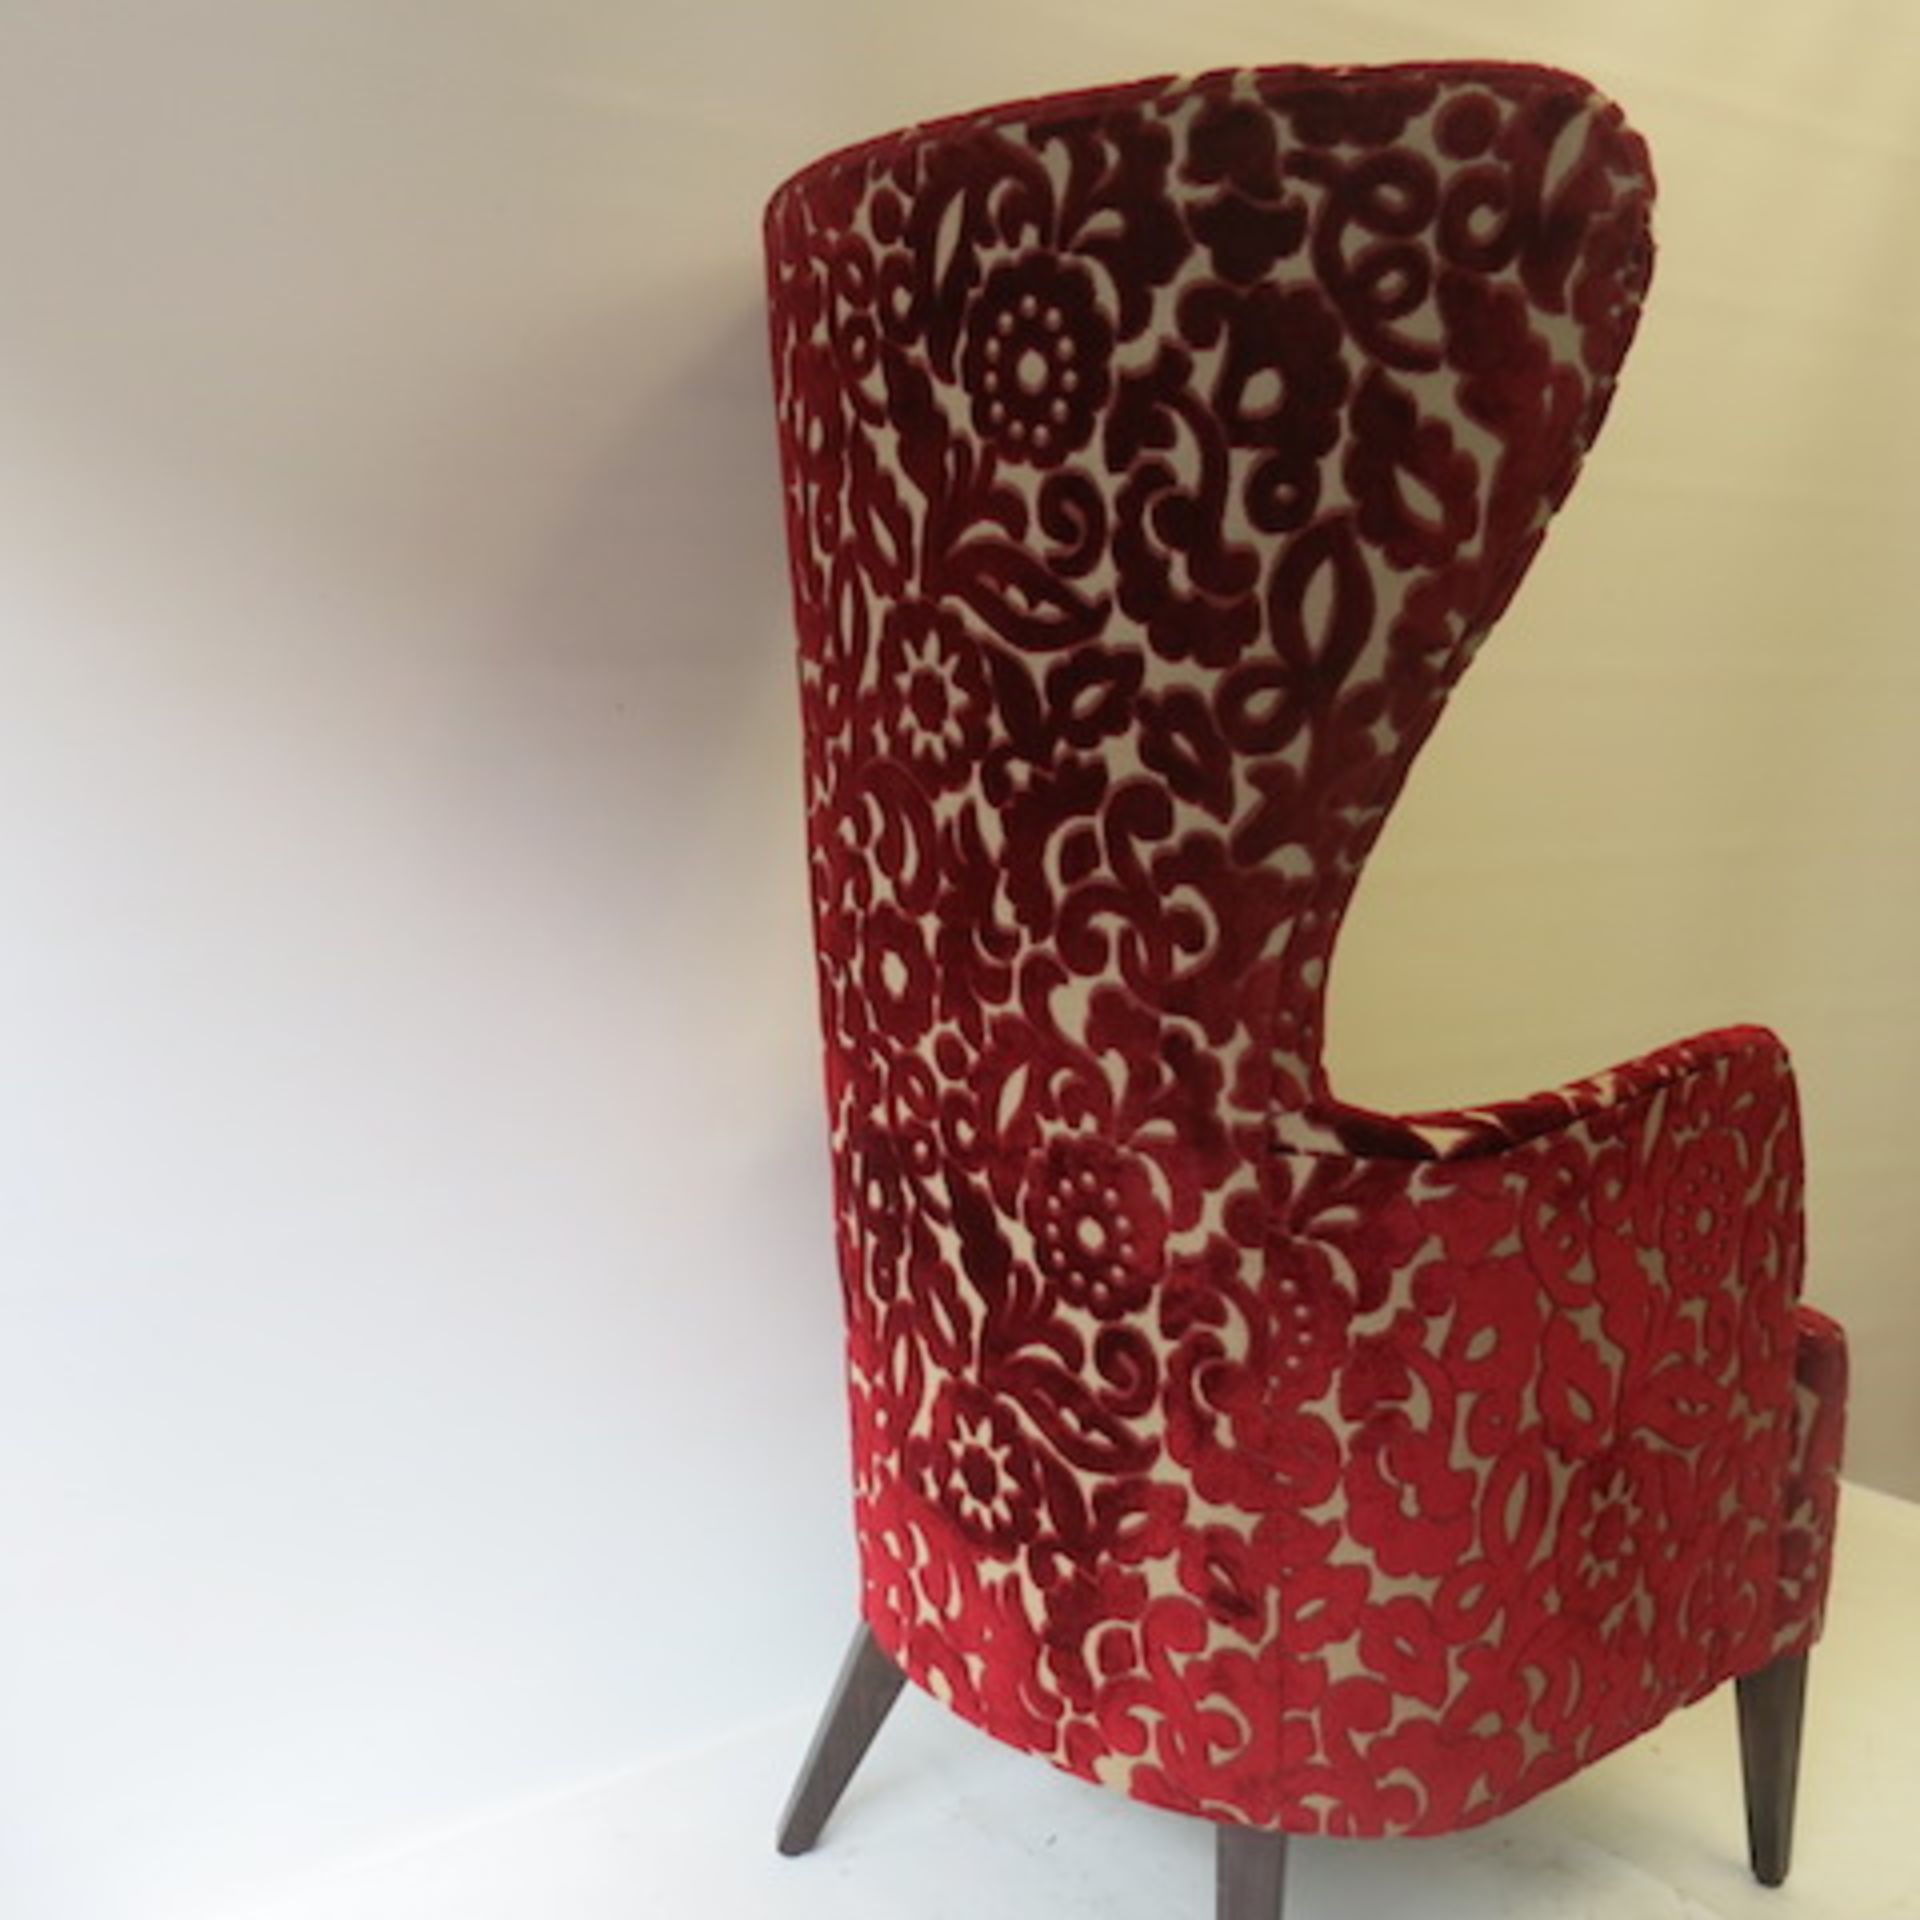 A High Back Wing Armchair with Crushed Velour Pattern in Deep Red & Cream, appears in good condition - Image 5 of 6